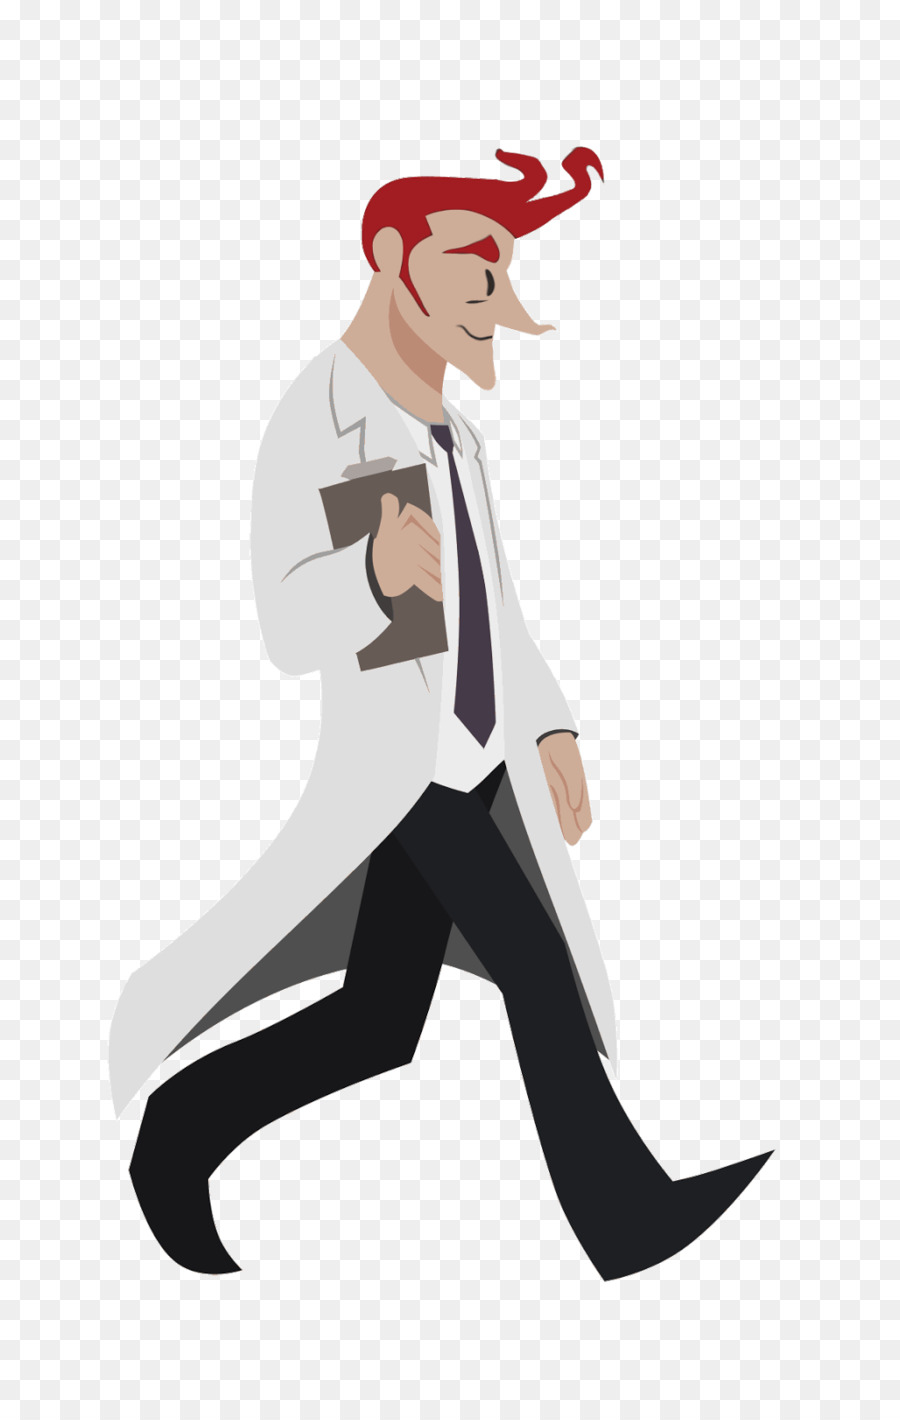 Walk cycle Animation Scientist Image GIF - Animation png download - 1026*1600 - Free Transparent WALK CYCLE png Download.